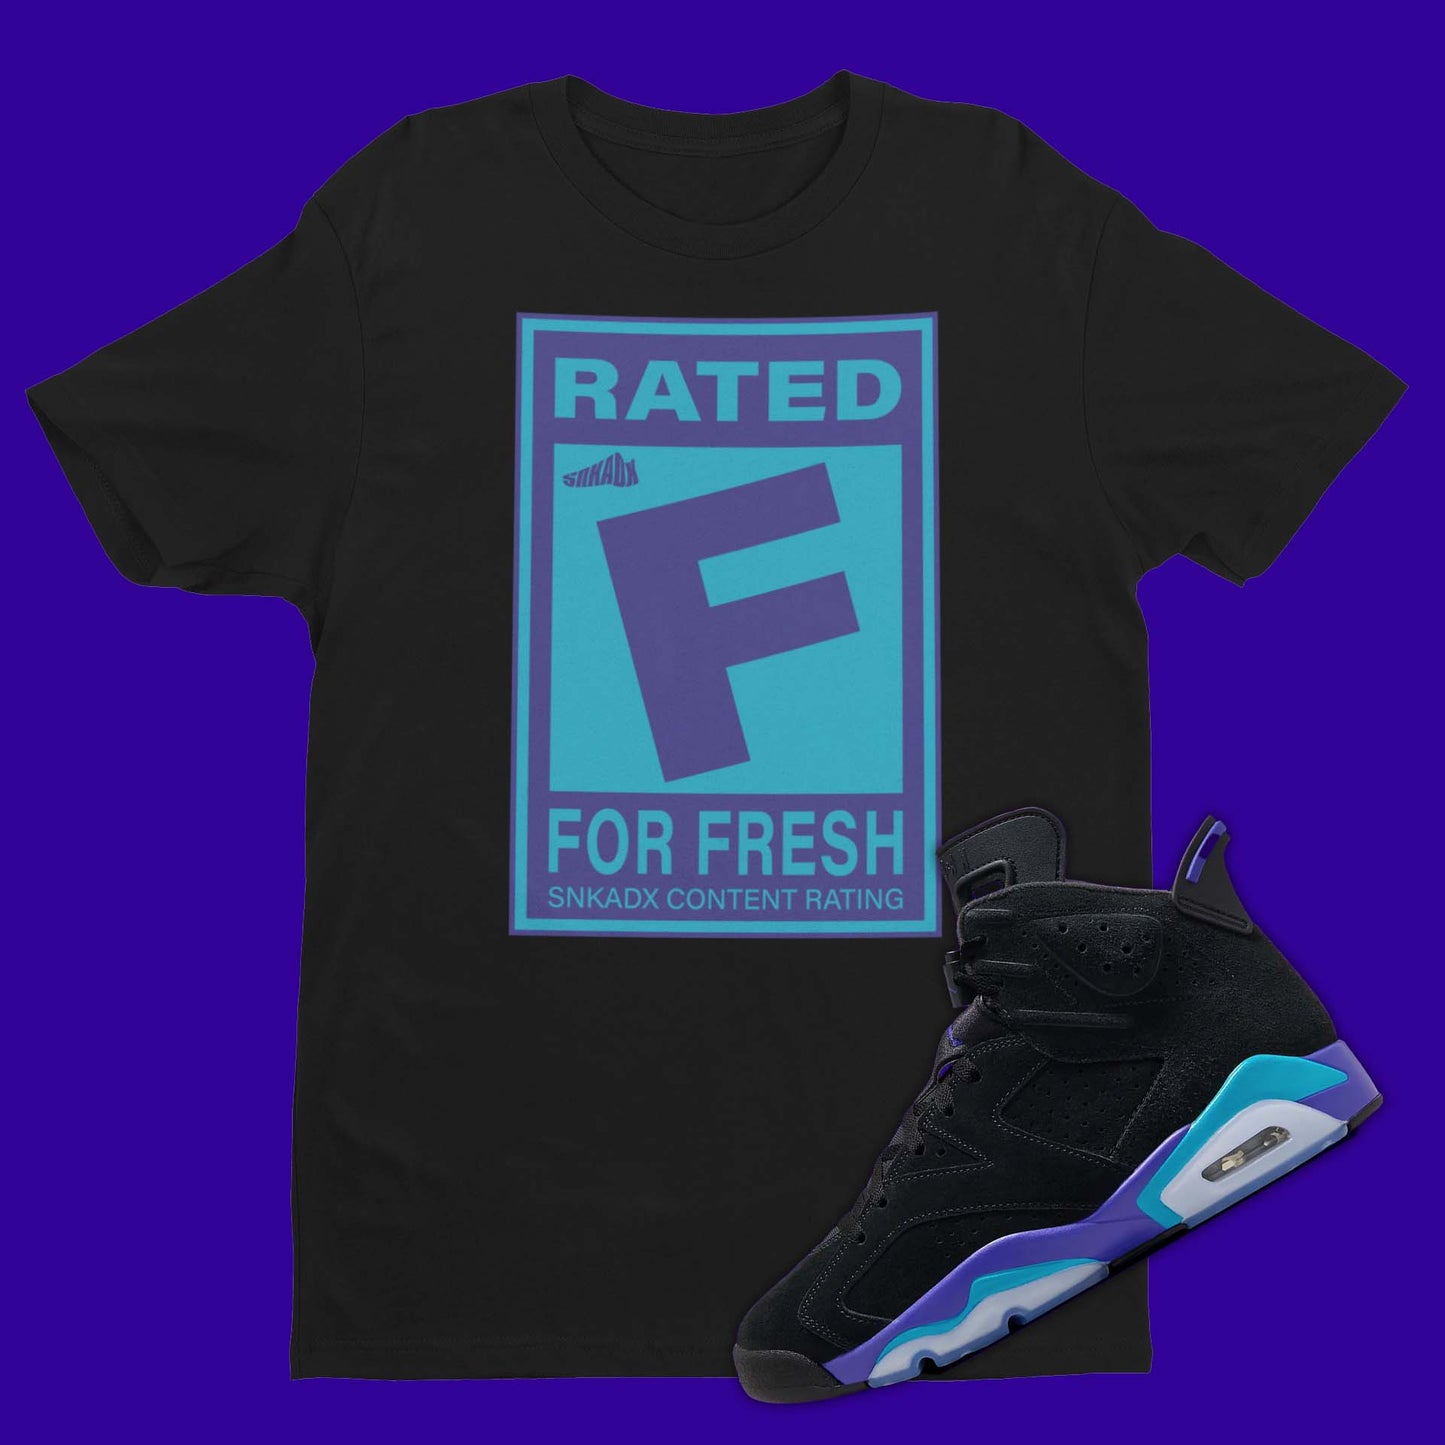 Rated F For Fresh Air Jordan 6 Aqua Matching black T-Shirt from SNKADX. Video Game Rating design on the front.